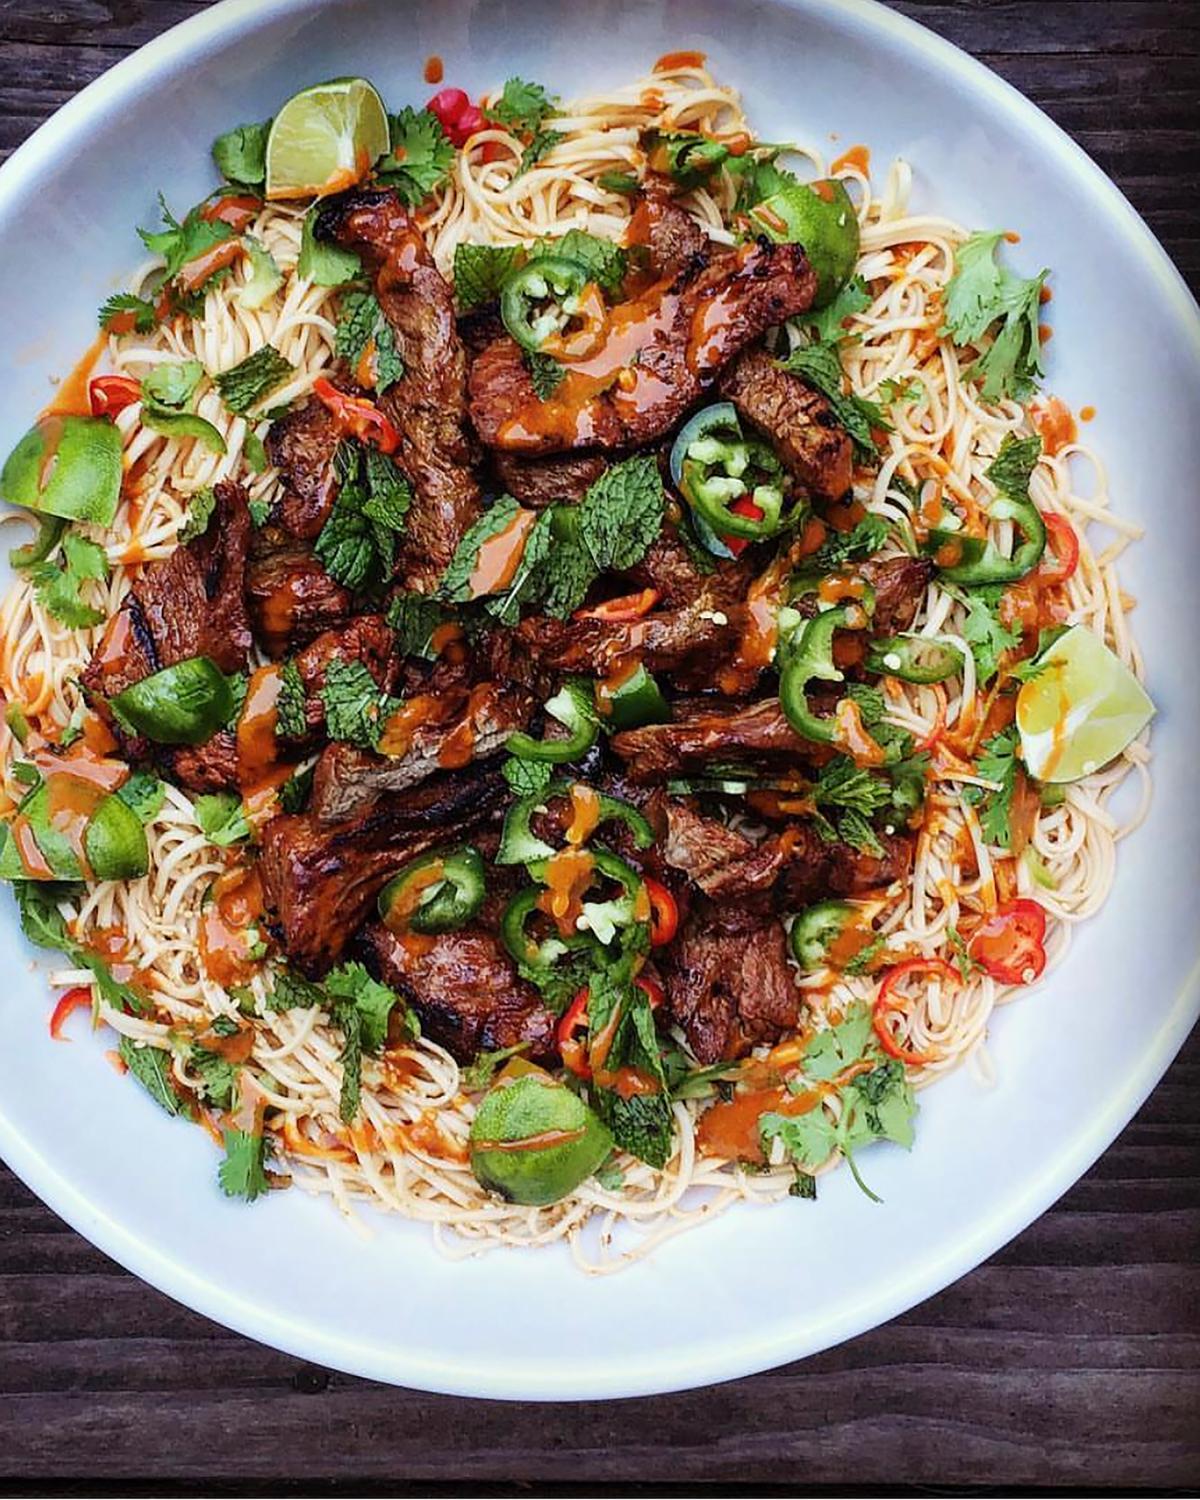 Lemongrass and chile add some zing to this steak noodle dish. (Lynda Balslev for Tastefood)